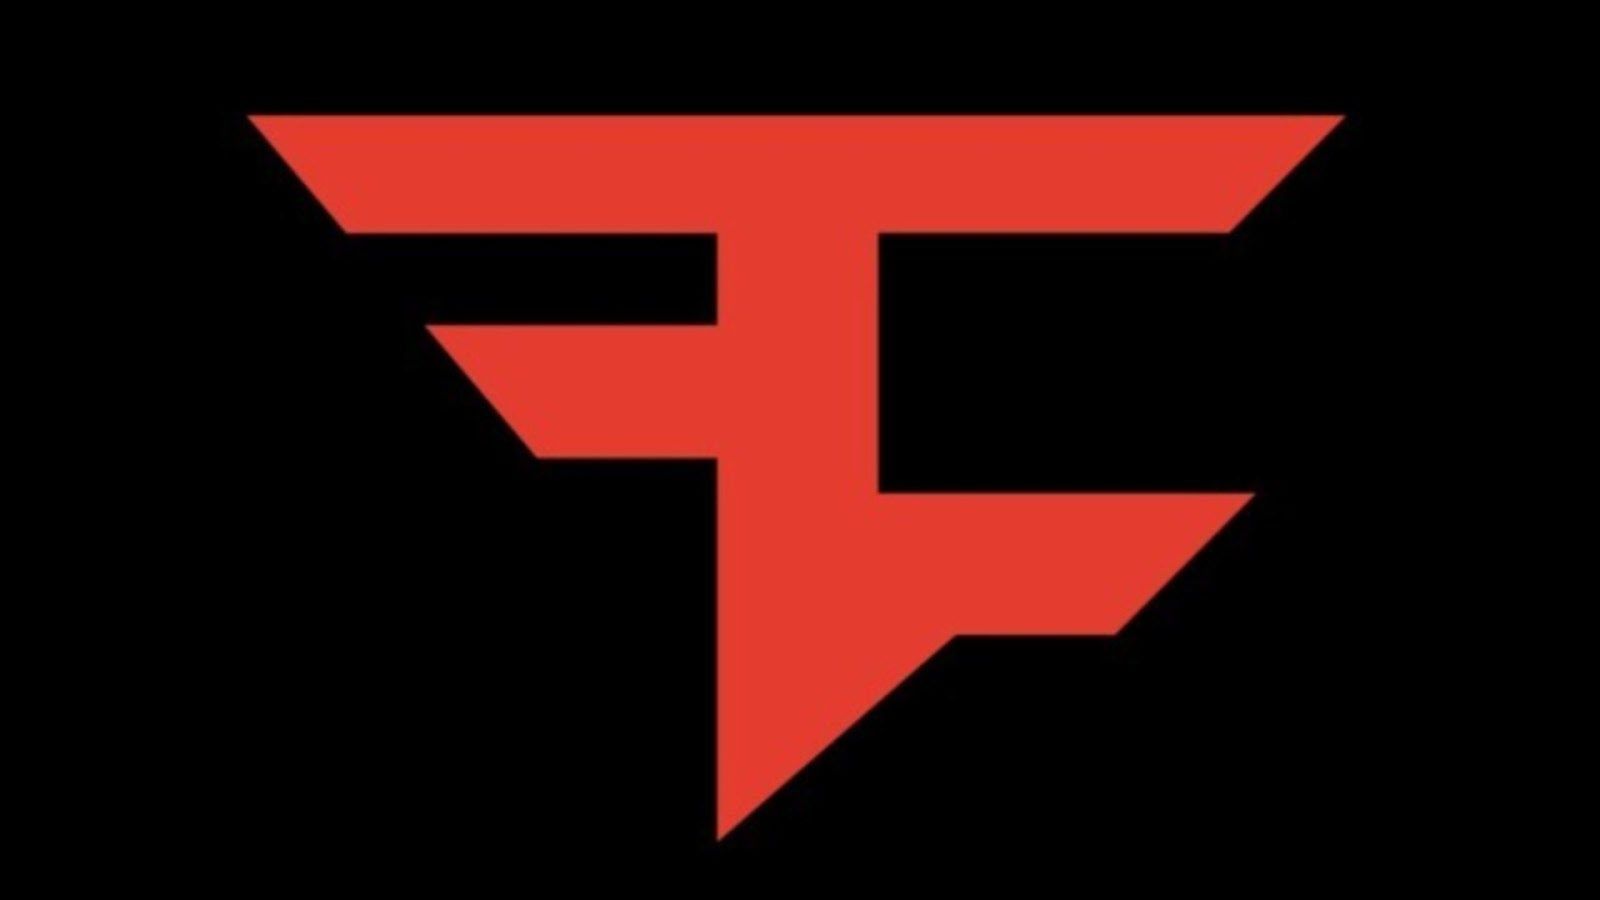 Professional Fortnite Coach Signs With FaZe Clan